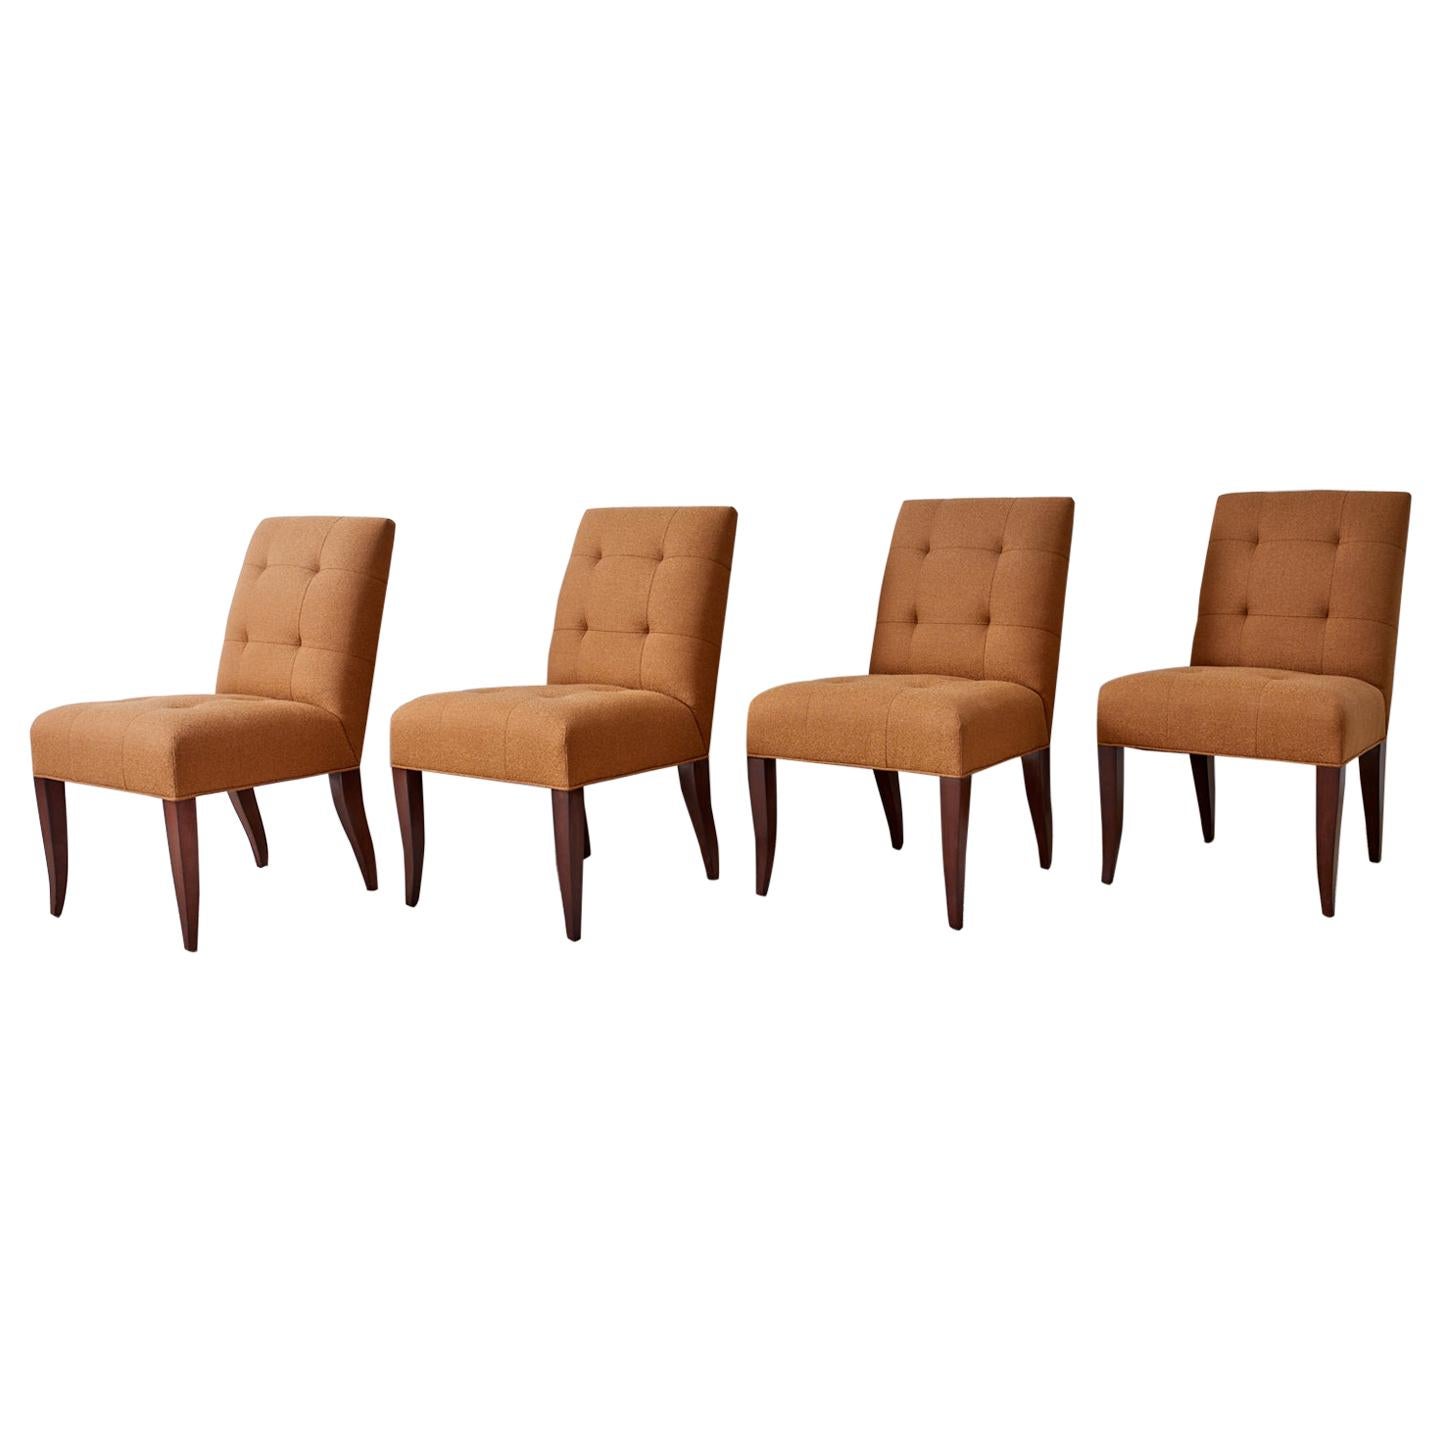 Stylish set of eight dining chairs by John Hutton for Donghia. 